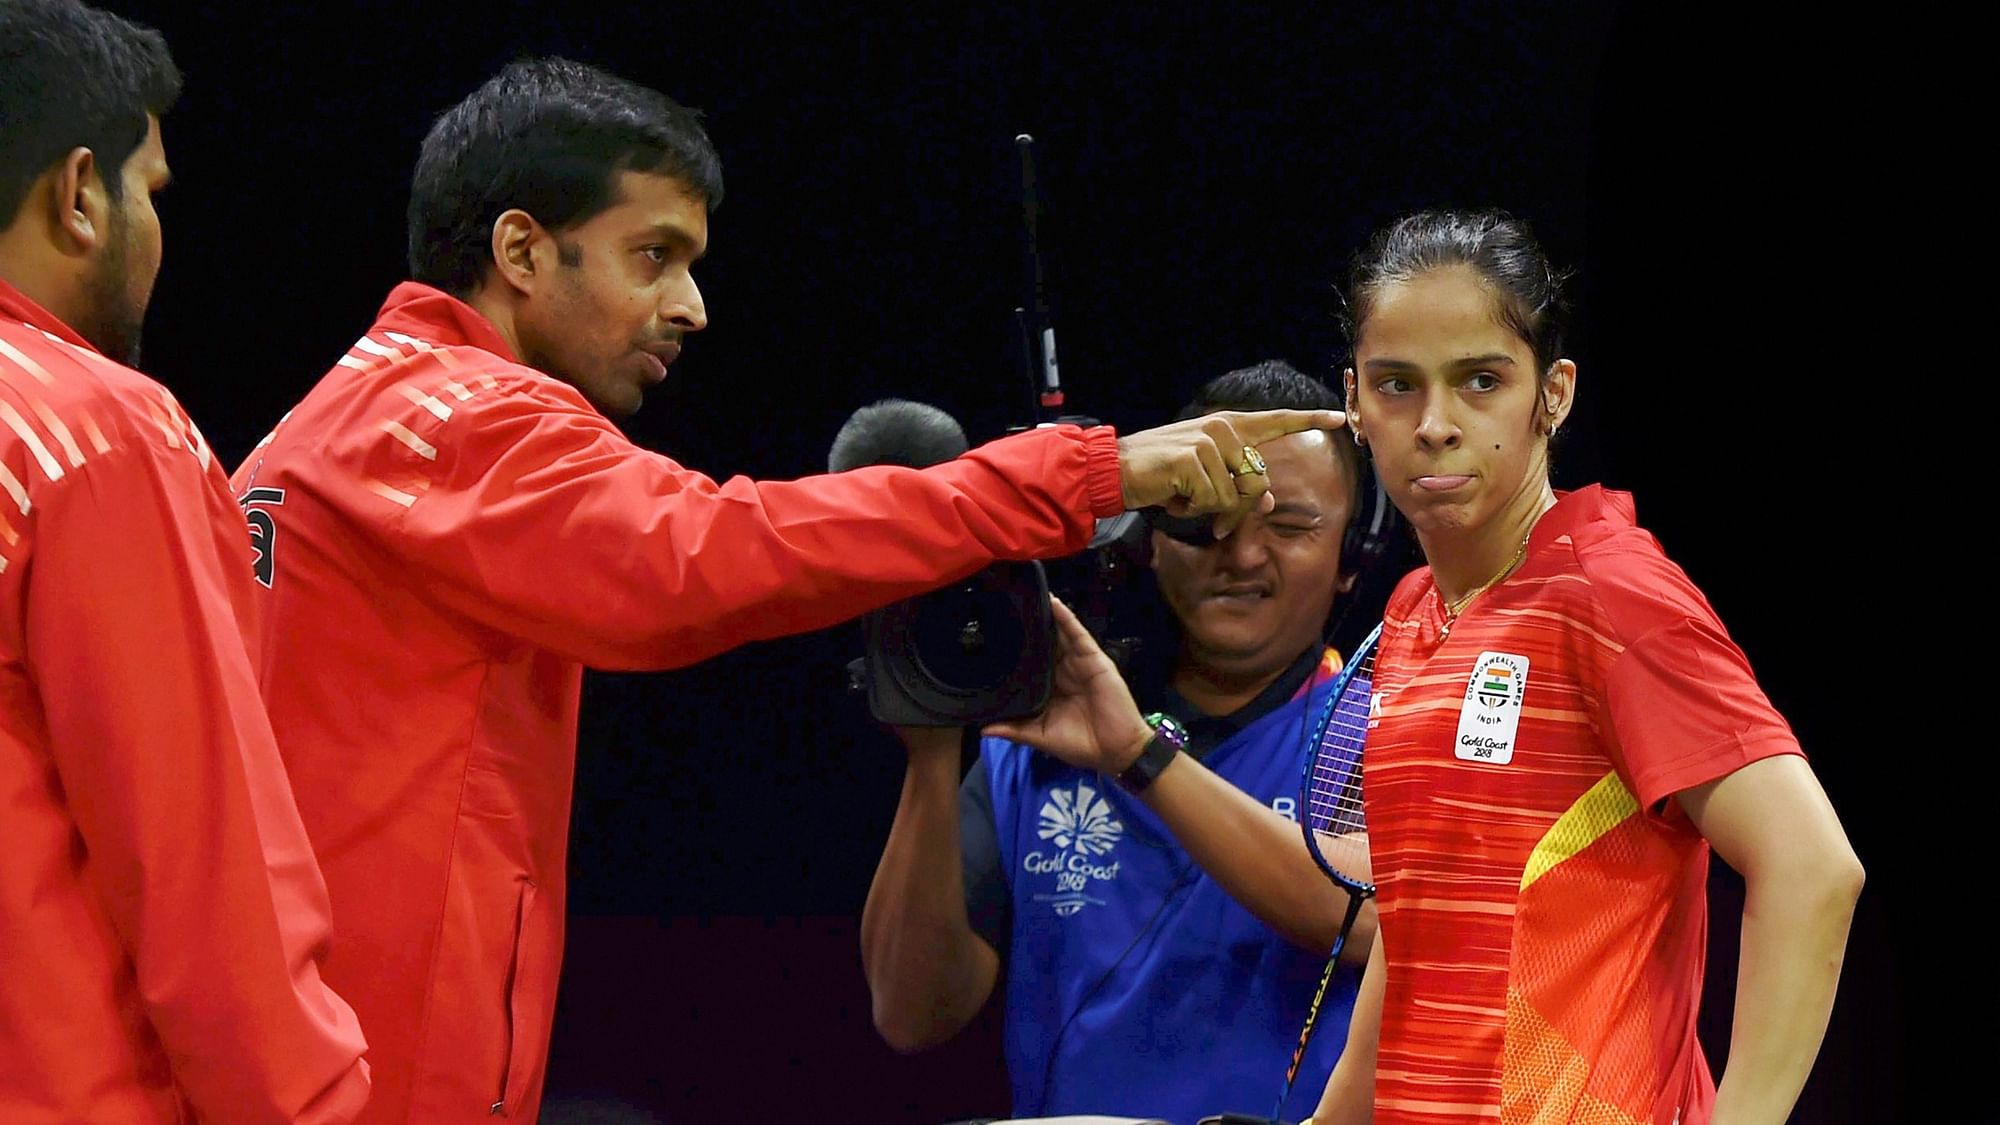 Gopichand has admitted Indian badminton missed a window with Saina and Srikanth where they could have taken a step back and prepared.